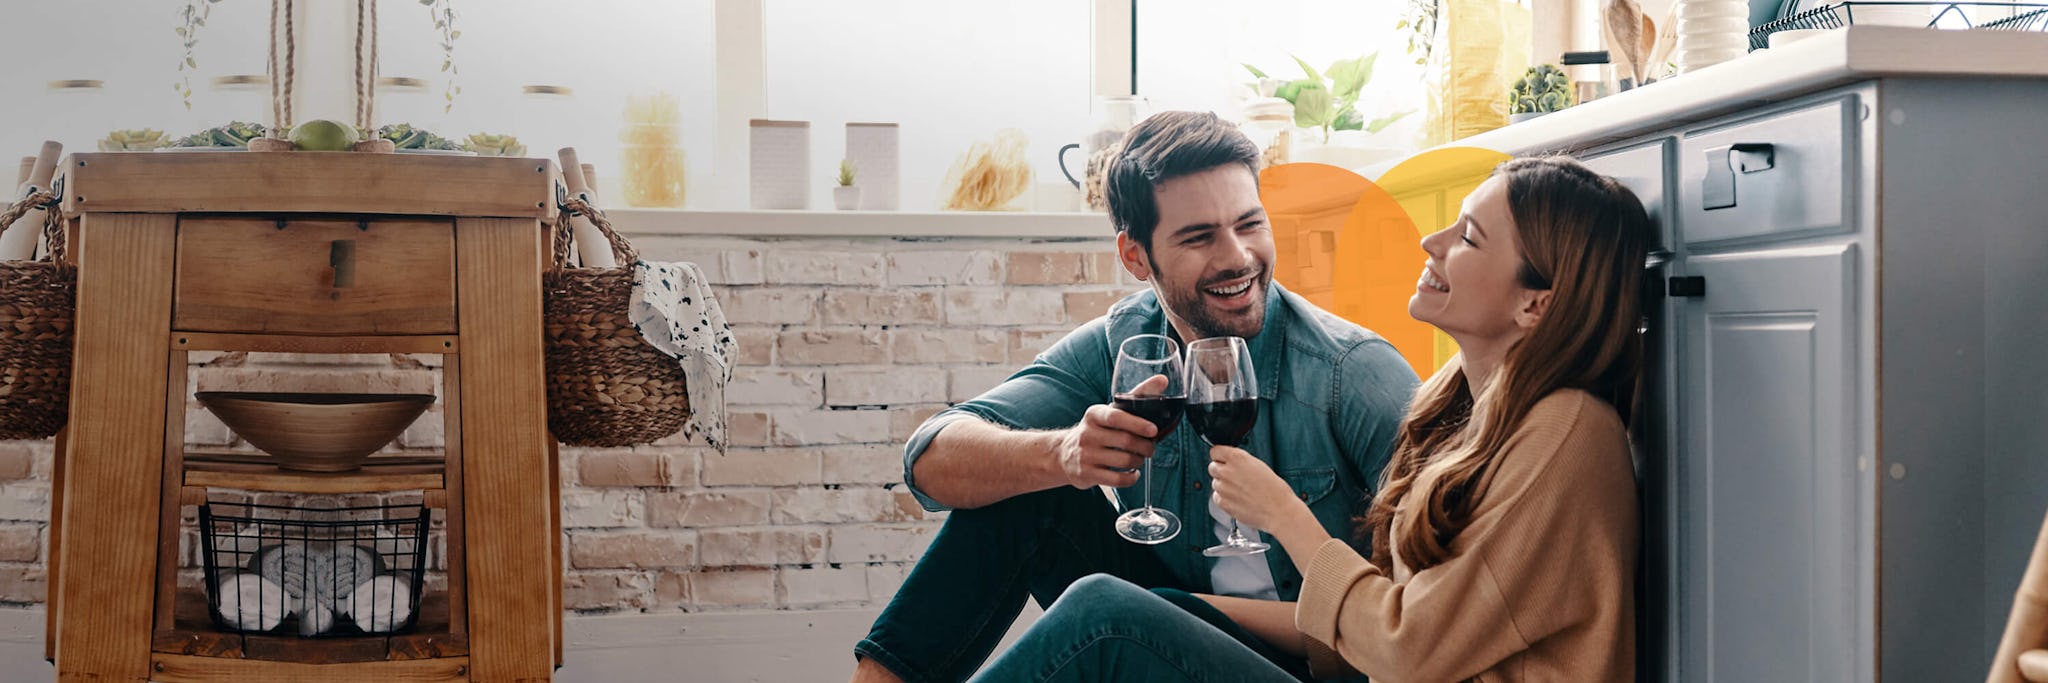 A couple sat on their kitchen floor smiling and drinking wine